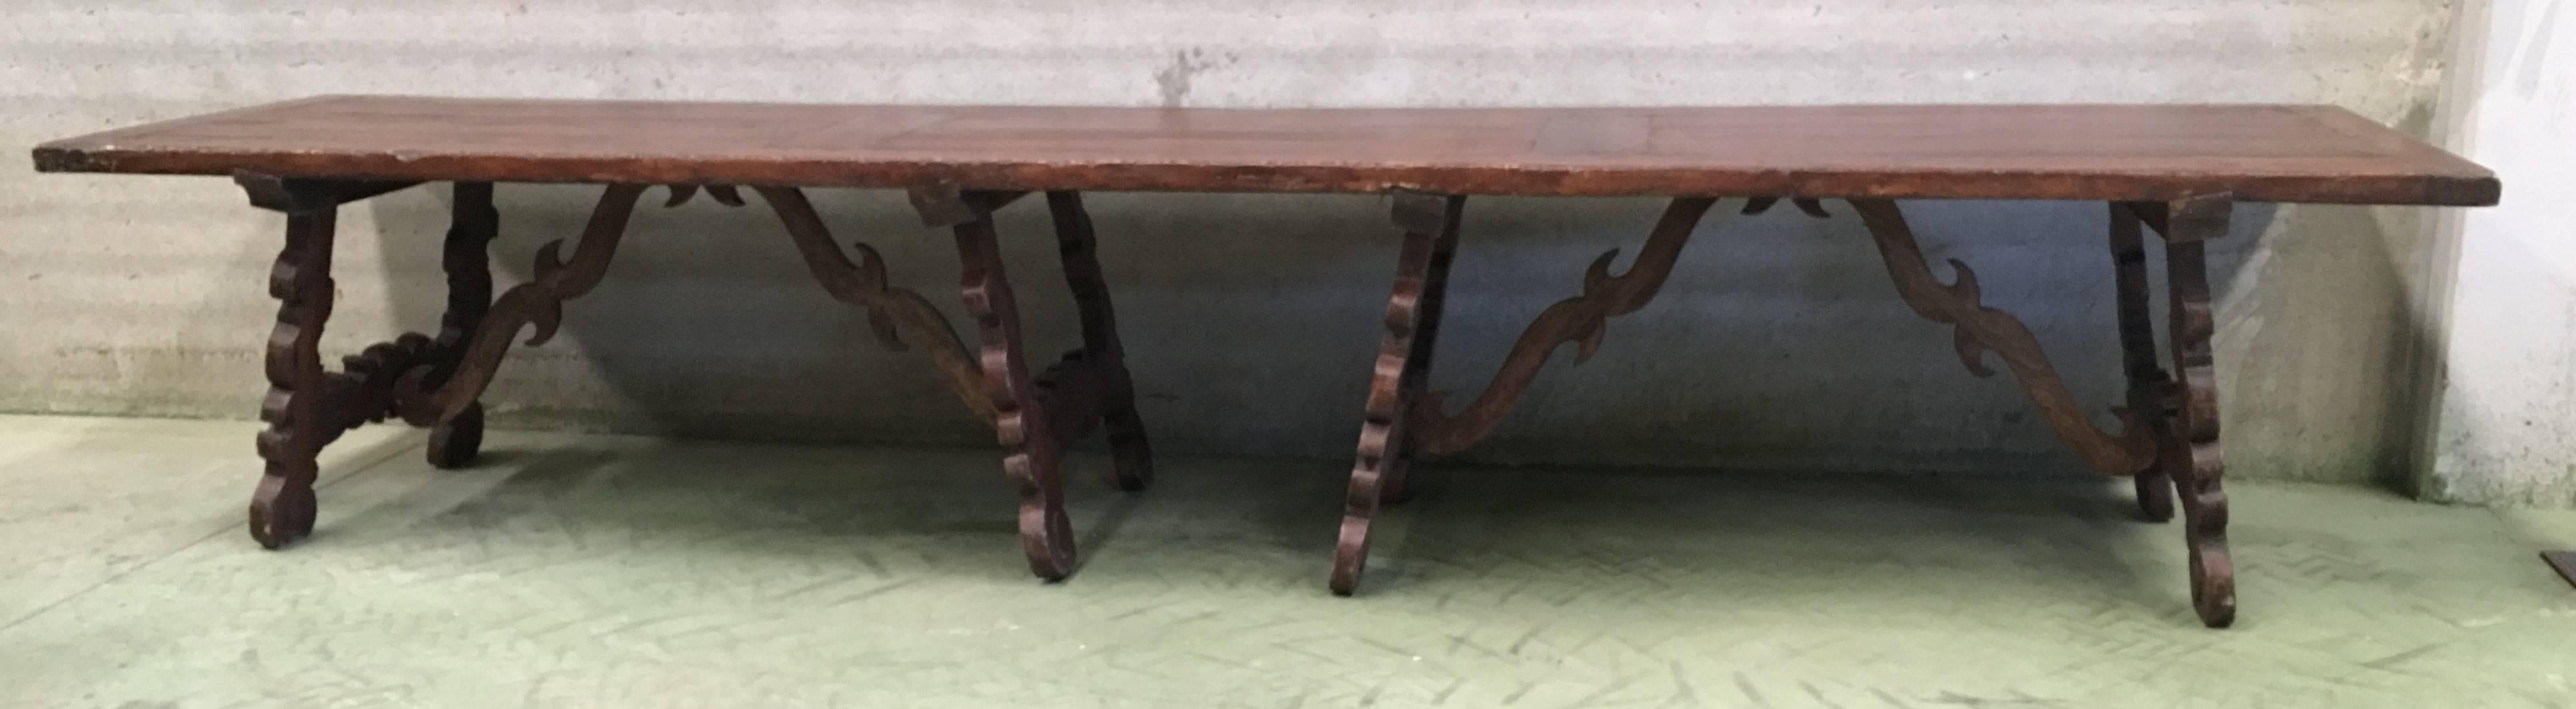 Early 19th Century French Baroque Style Walnut Trestle Dining Farm Table 163´ 2